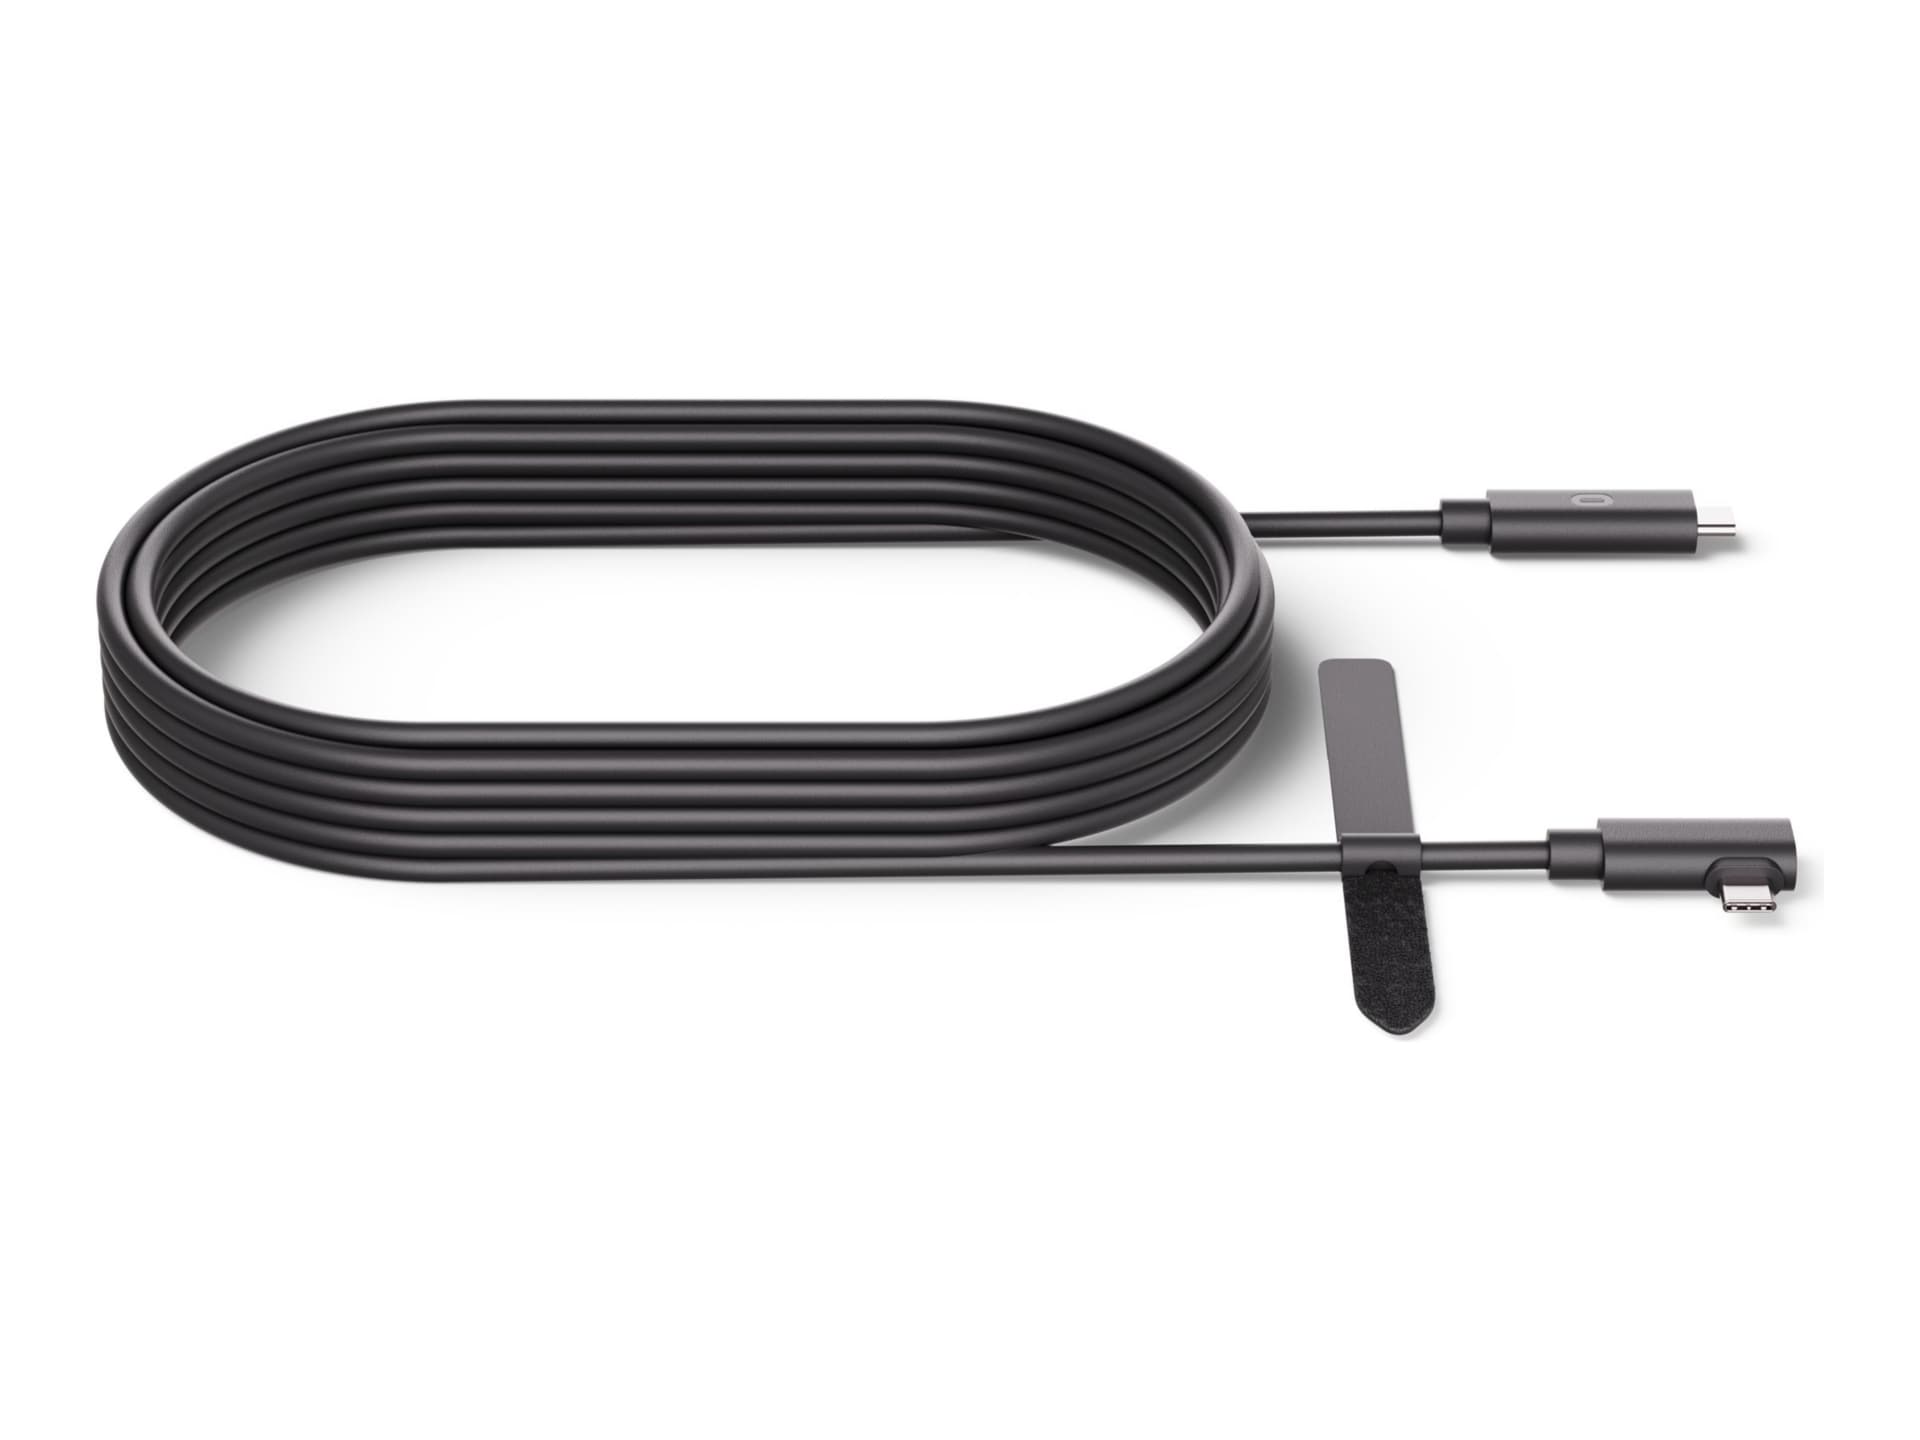 Oculus Link - Virtual Reality Headset Cable - USB-C to USB-C - 16.4 ft